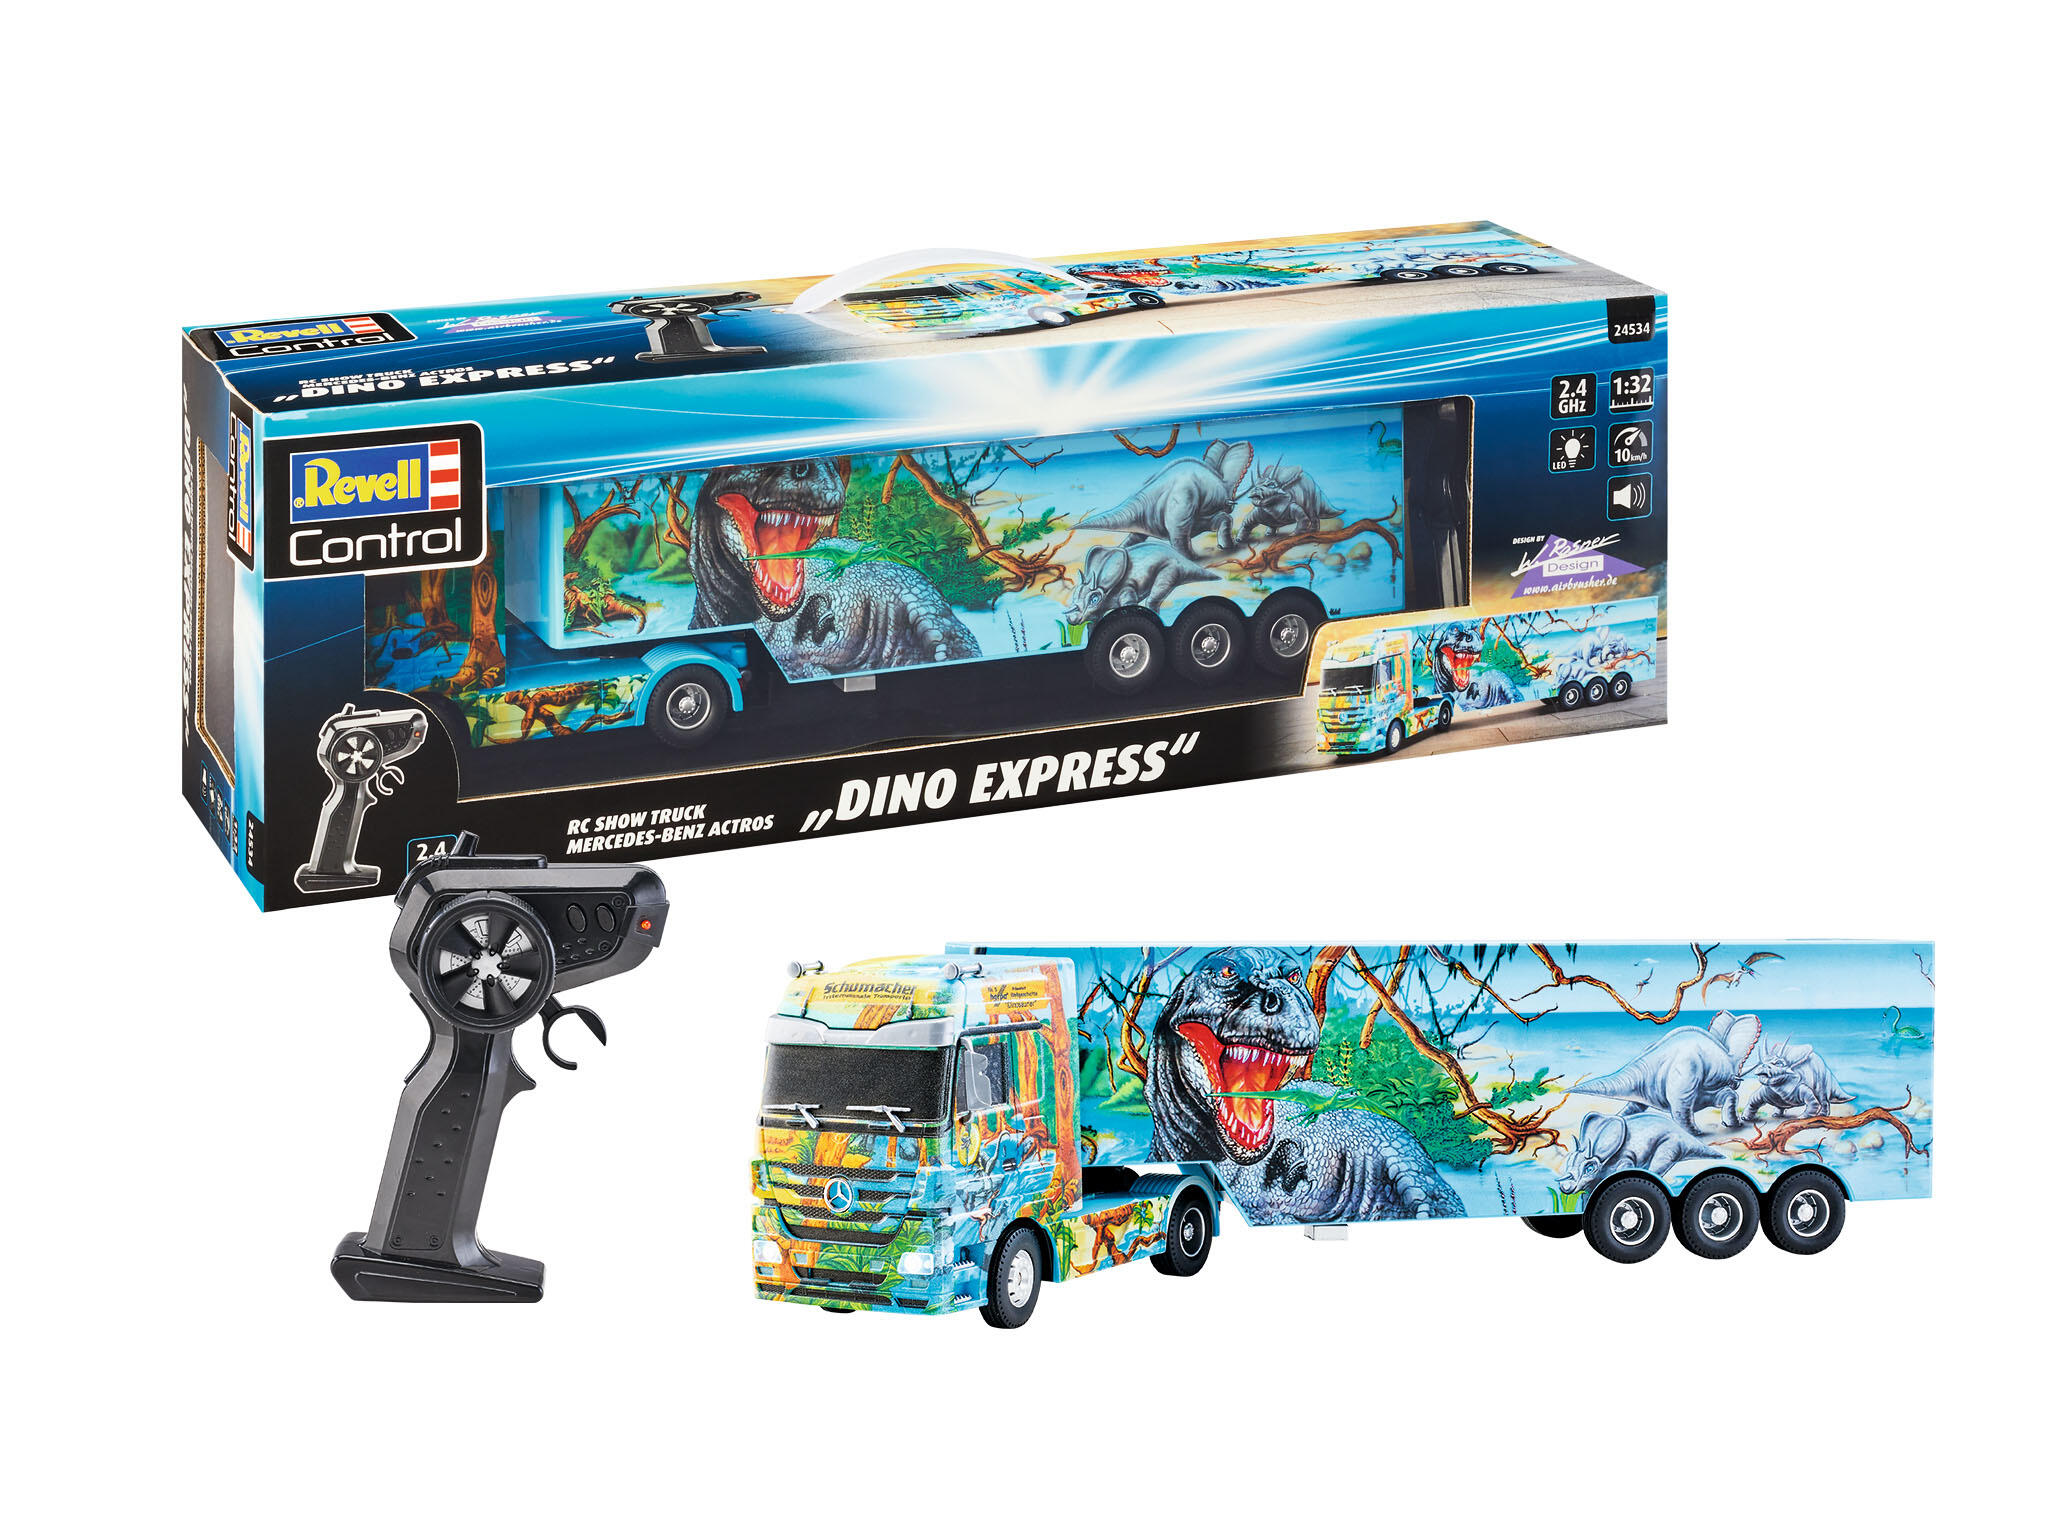 Revell 24534 RC Show Truck Mercedes Benz Actros "Dino Express" Revell Control Ferngesteuertes Auto